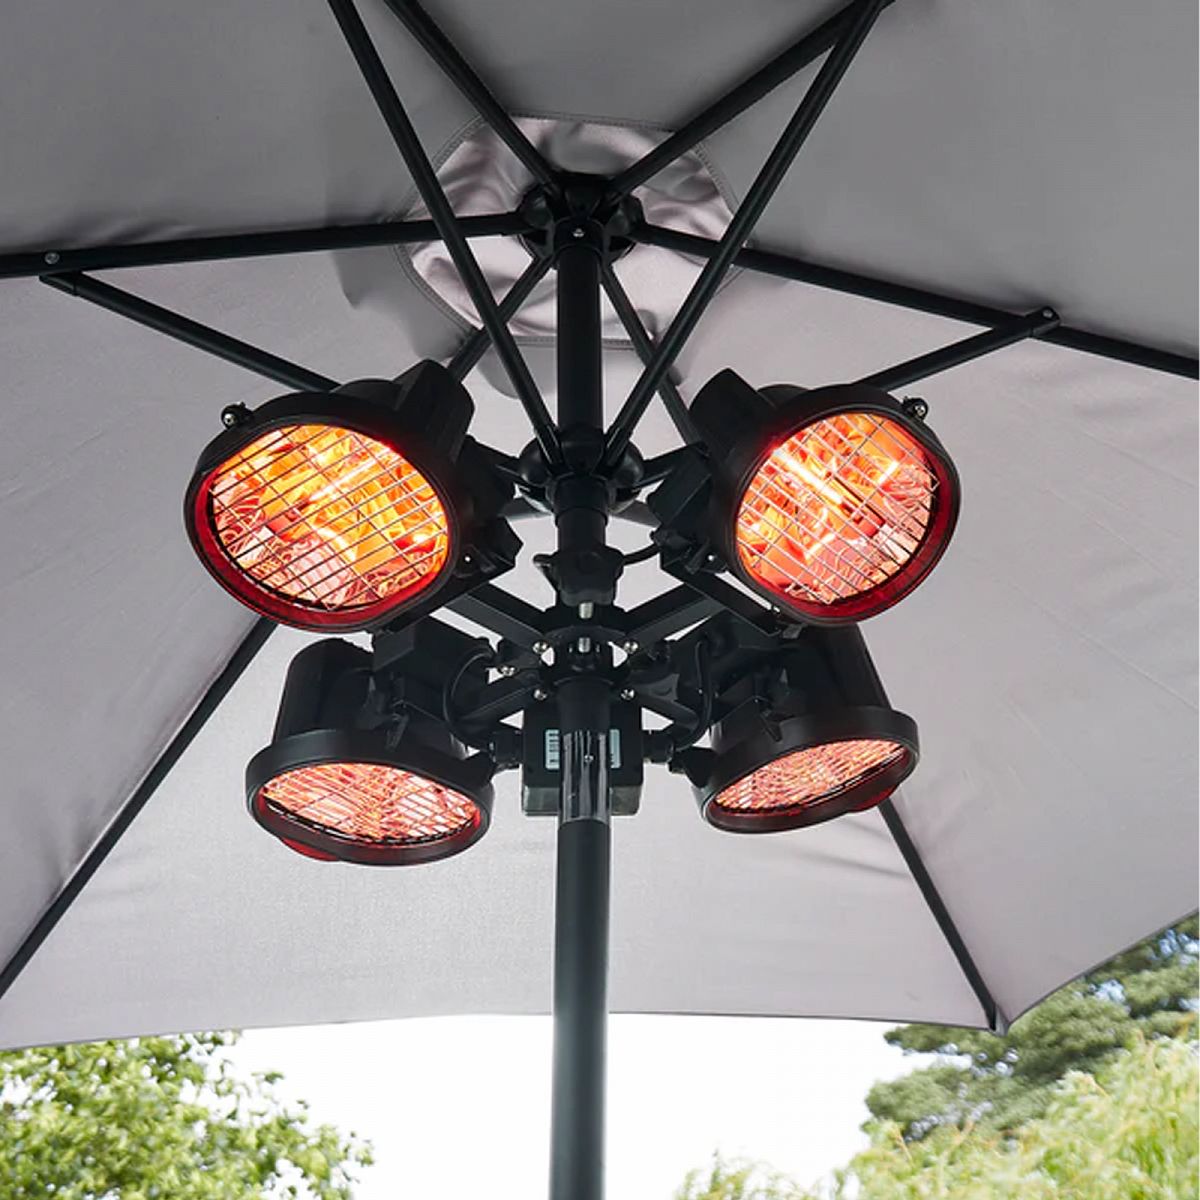 Ruby Outdoor Alum Parasol Heater by Radiant